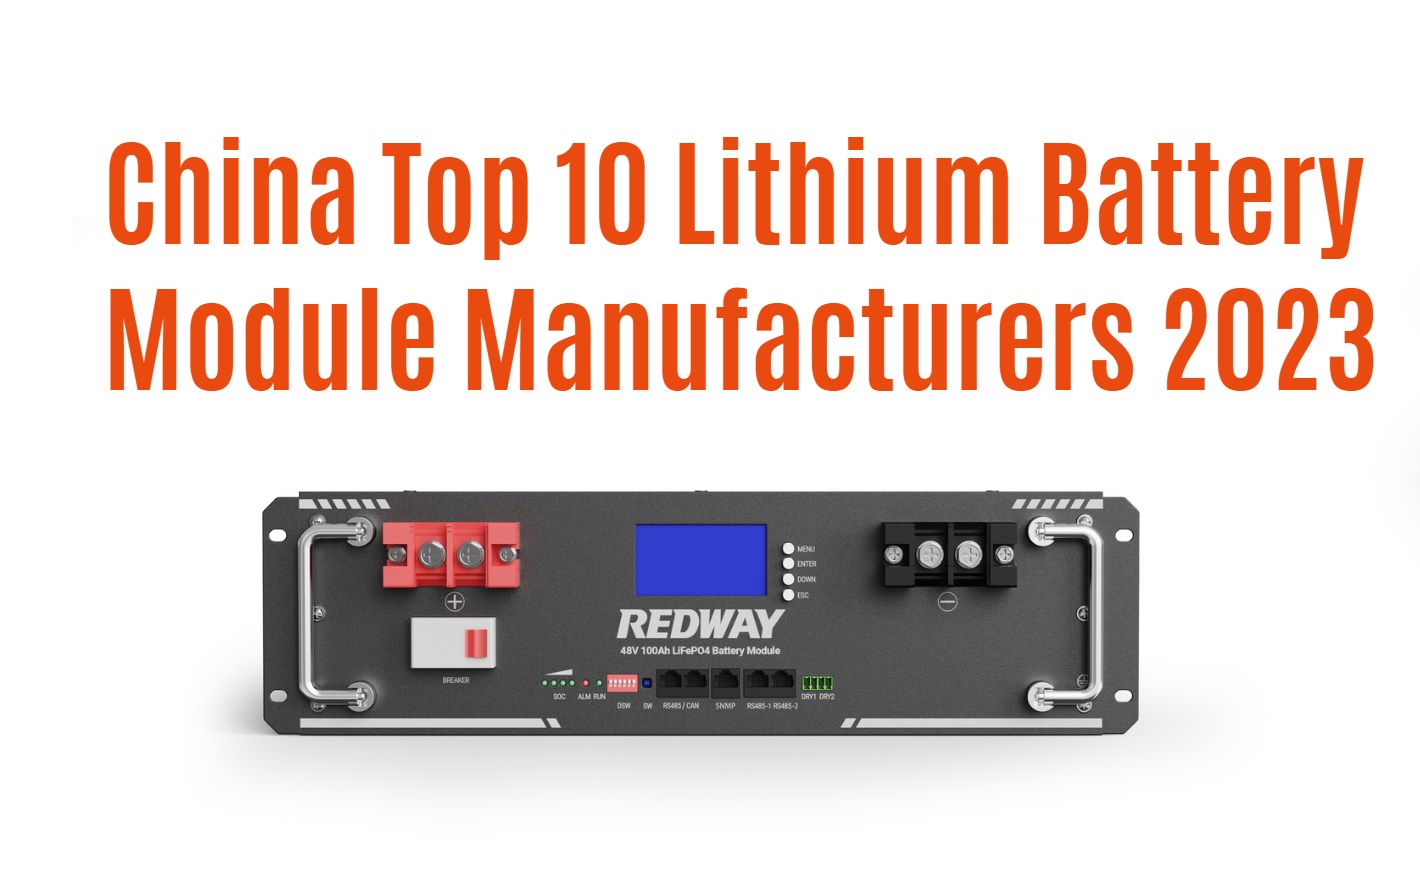 China Top 10 Lithium Battery Module Manufacturers 2023. 48v 100ah server rack battery factory redway snmp app